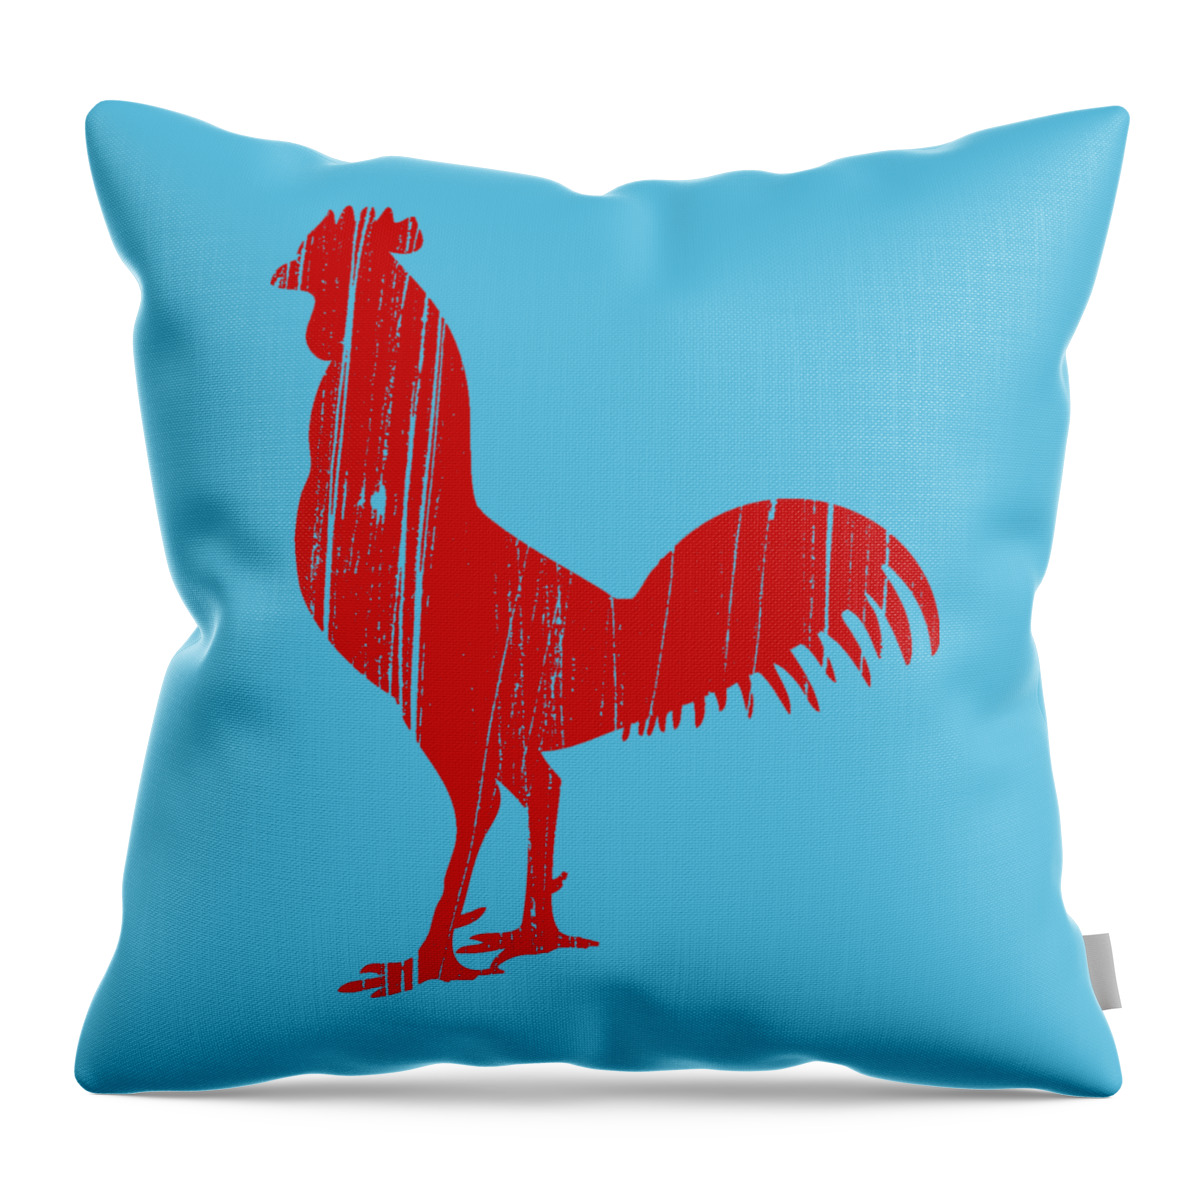 Red Throw Pillow featuring the drawing Red Rooster Tee by Edward Fielding